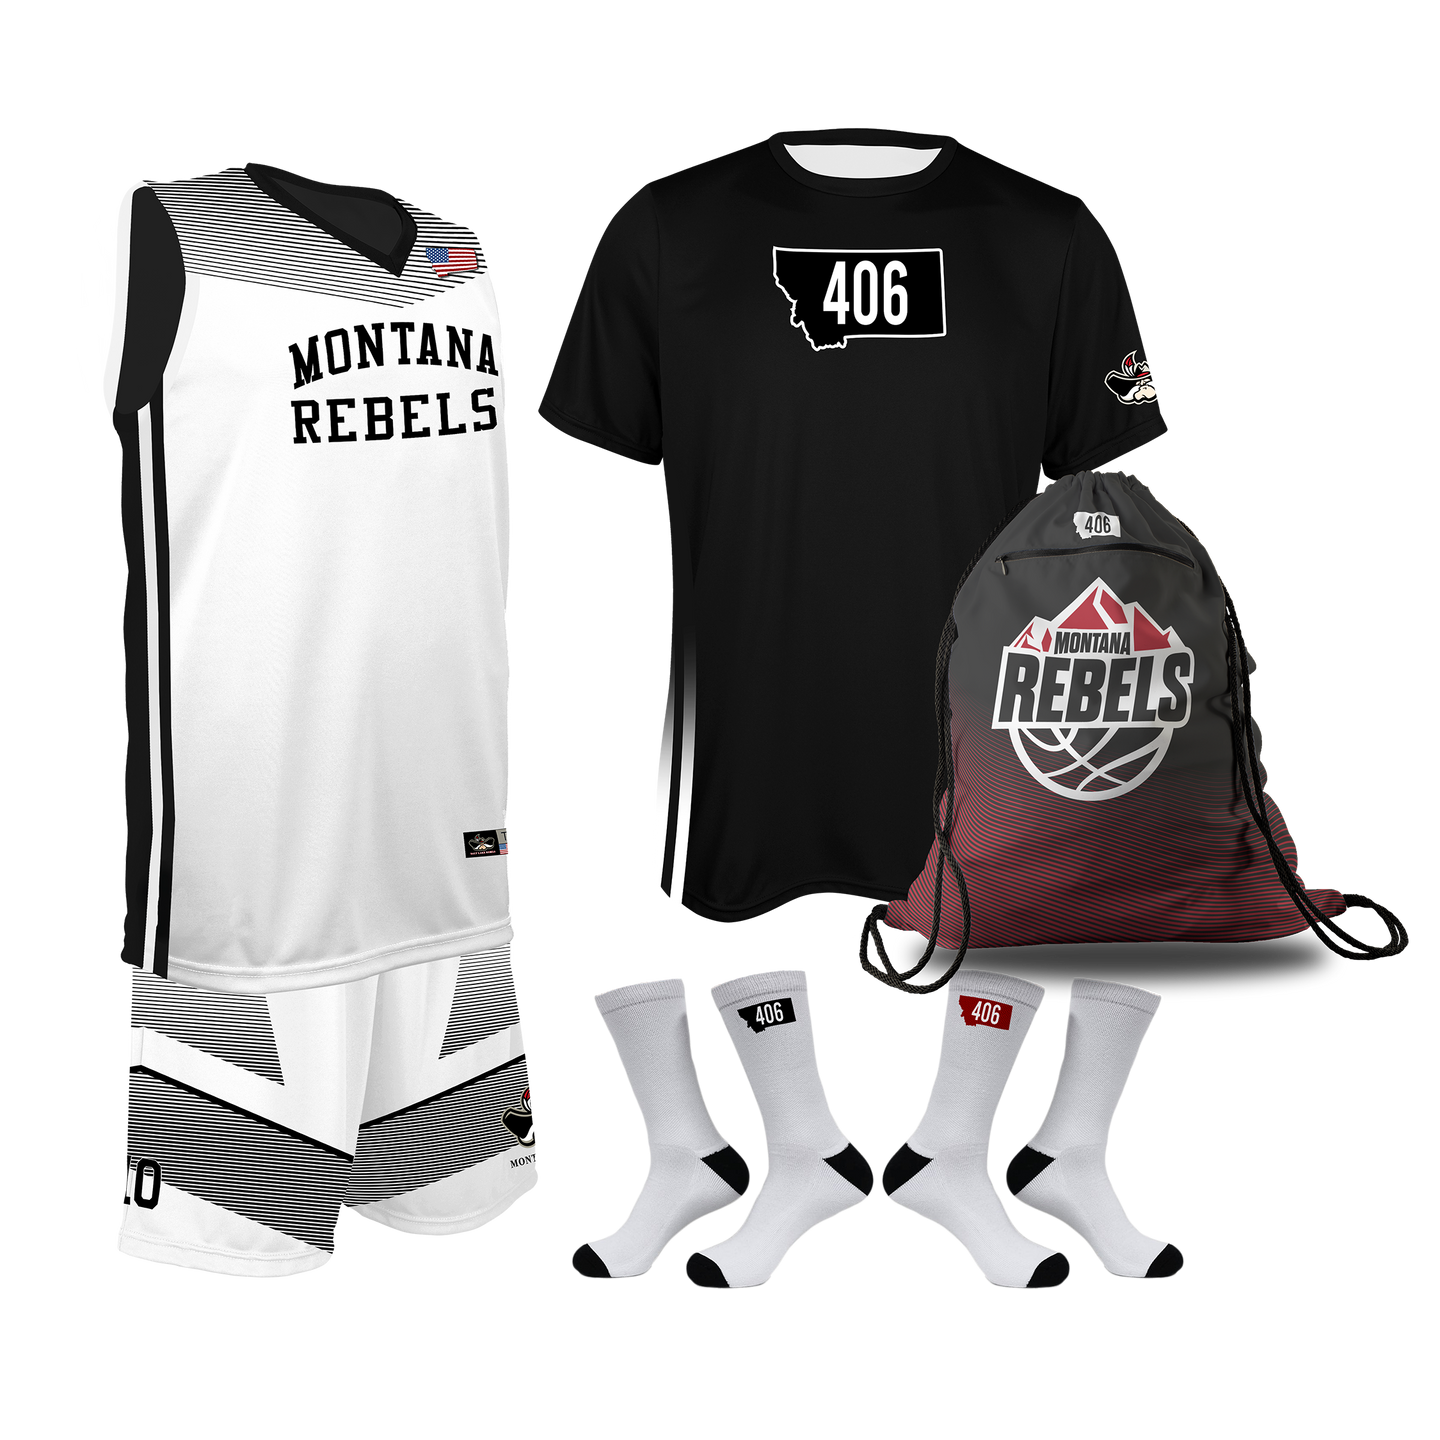 OPTION 2 - Youth Montana Lady Rebels Player Pack